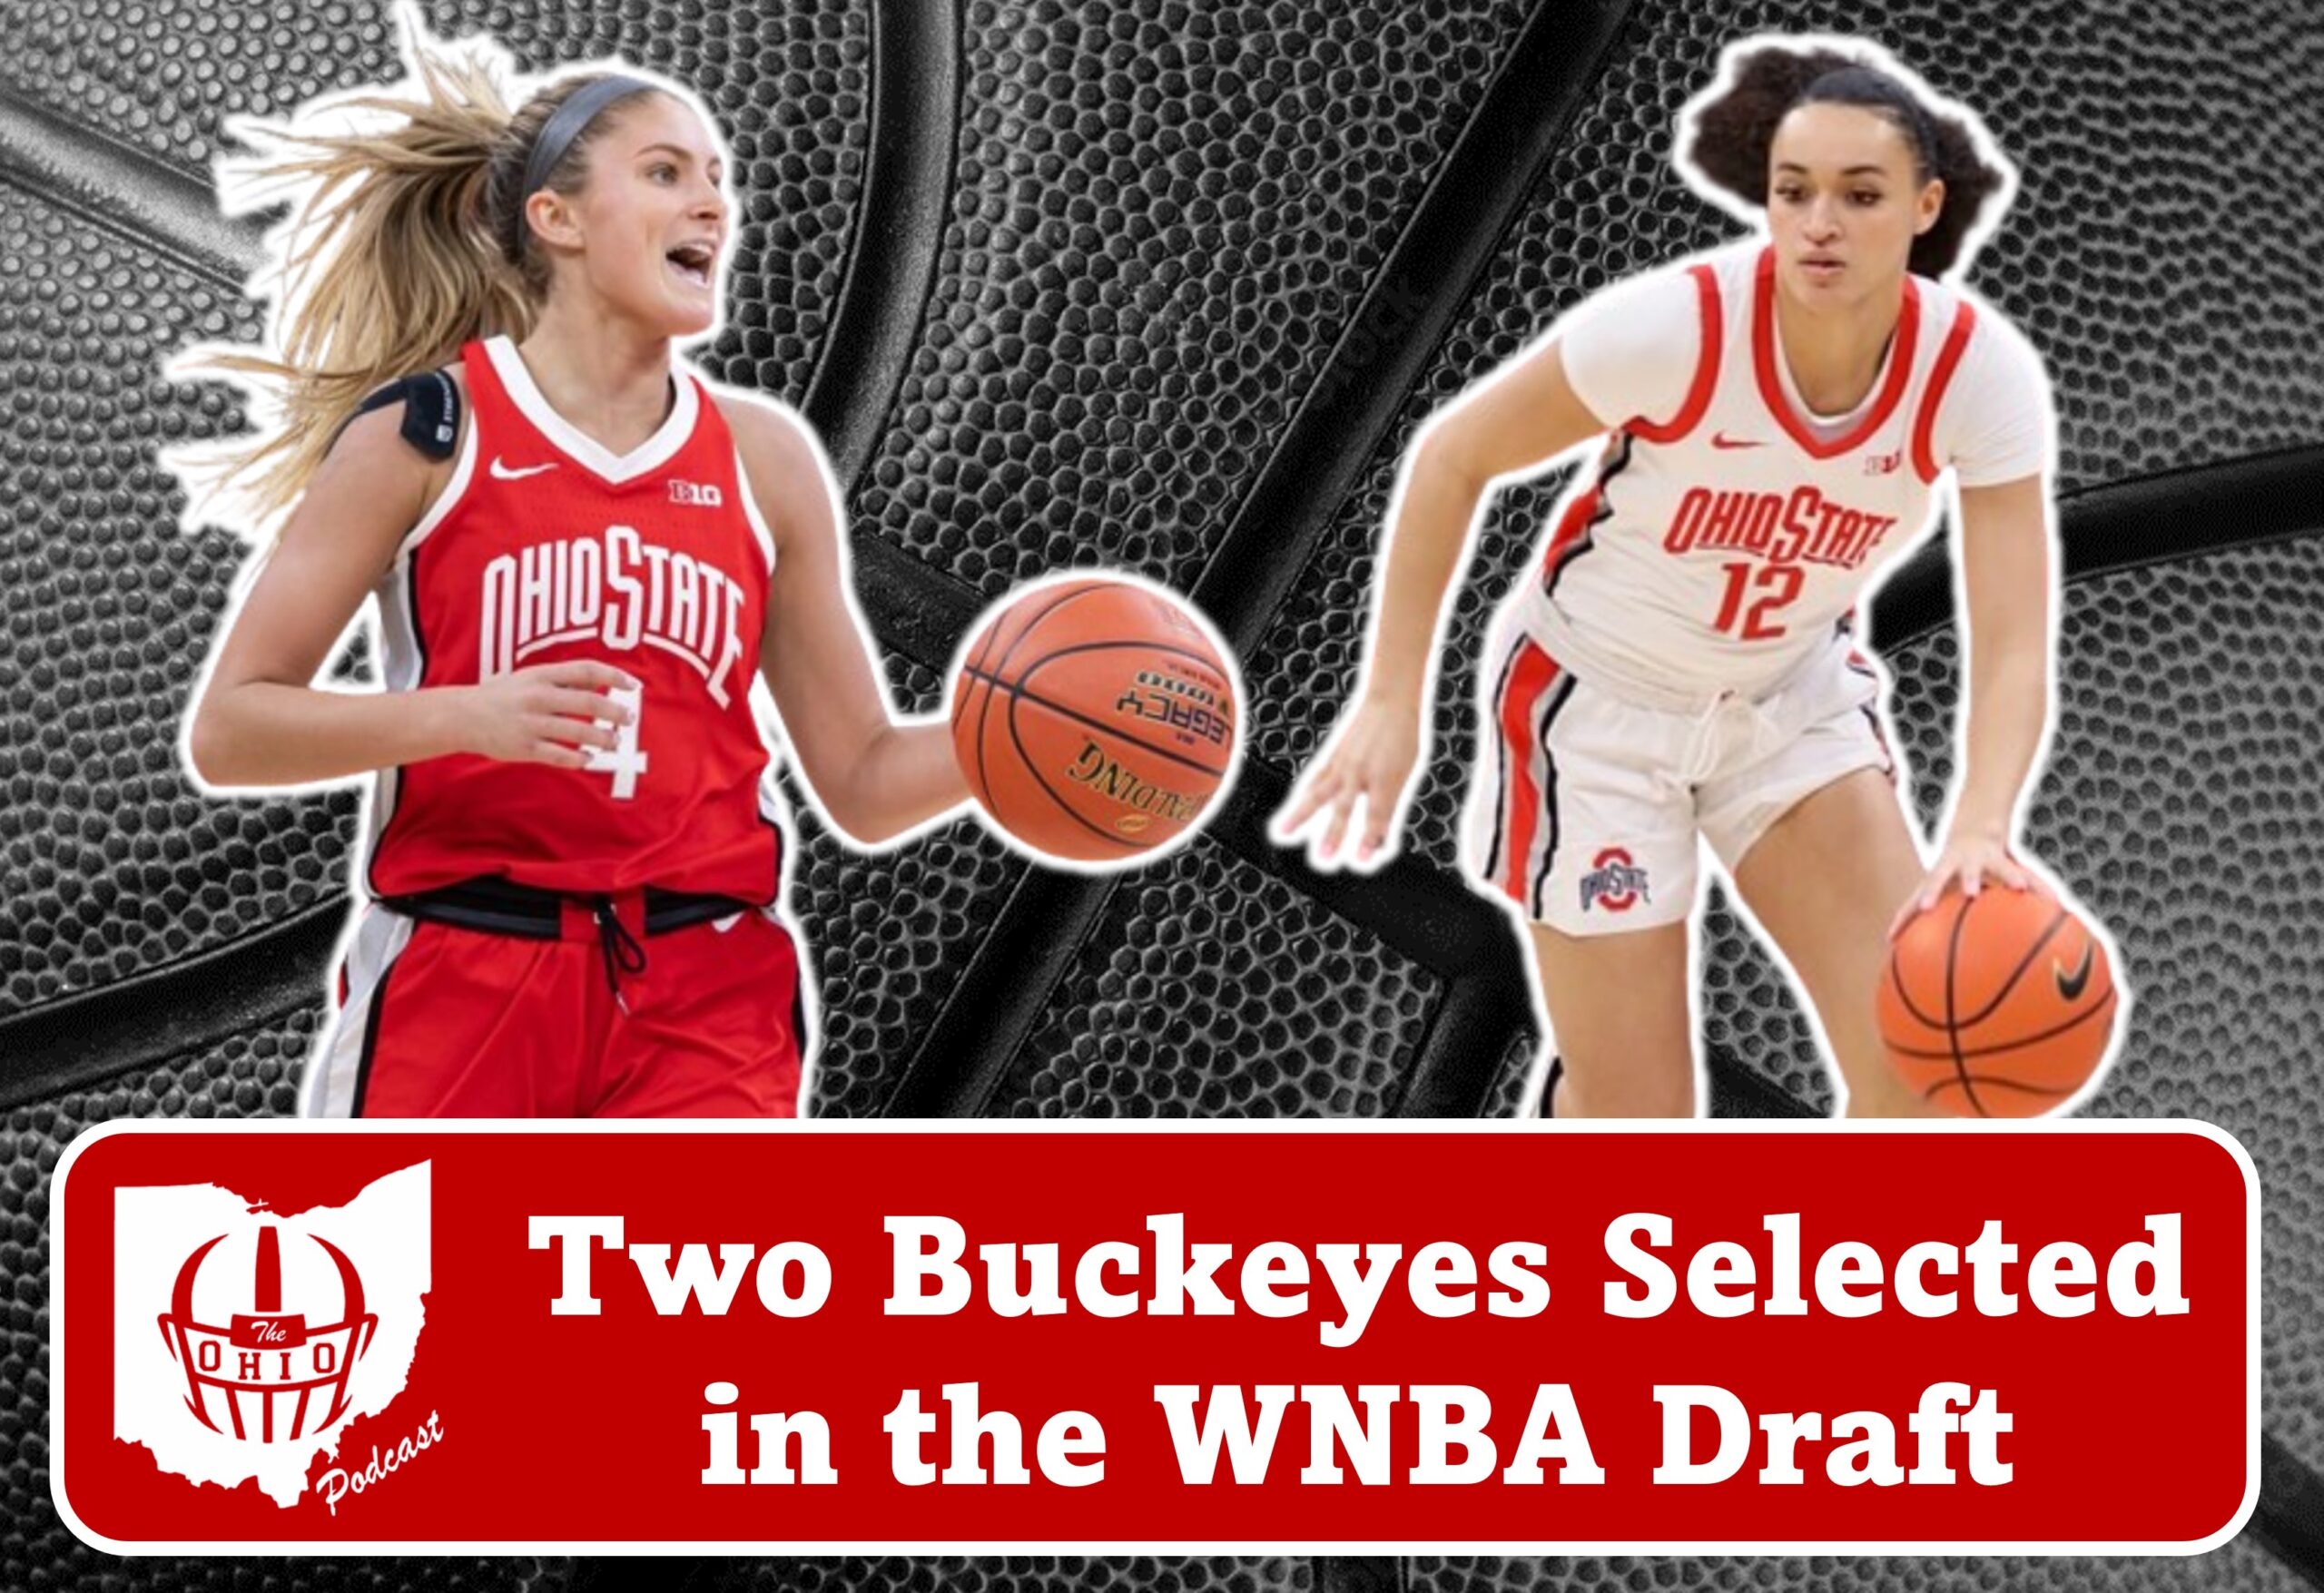 Two Buckeyes Drafted to the WNBA